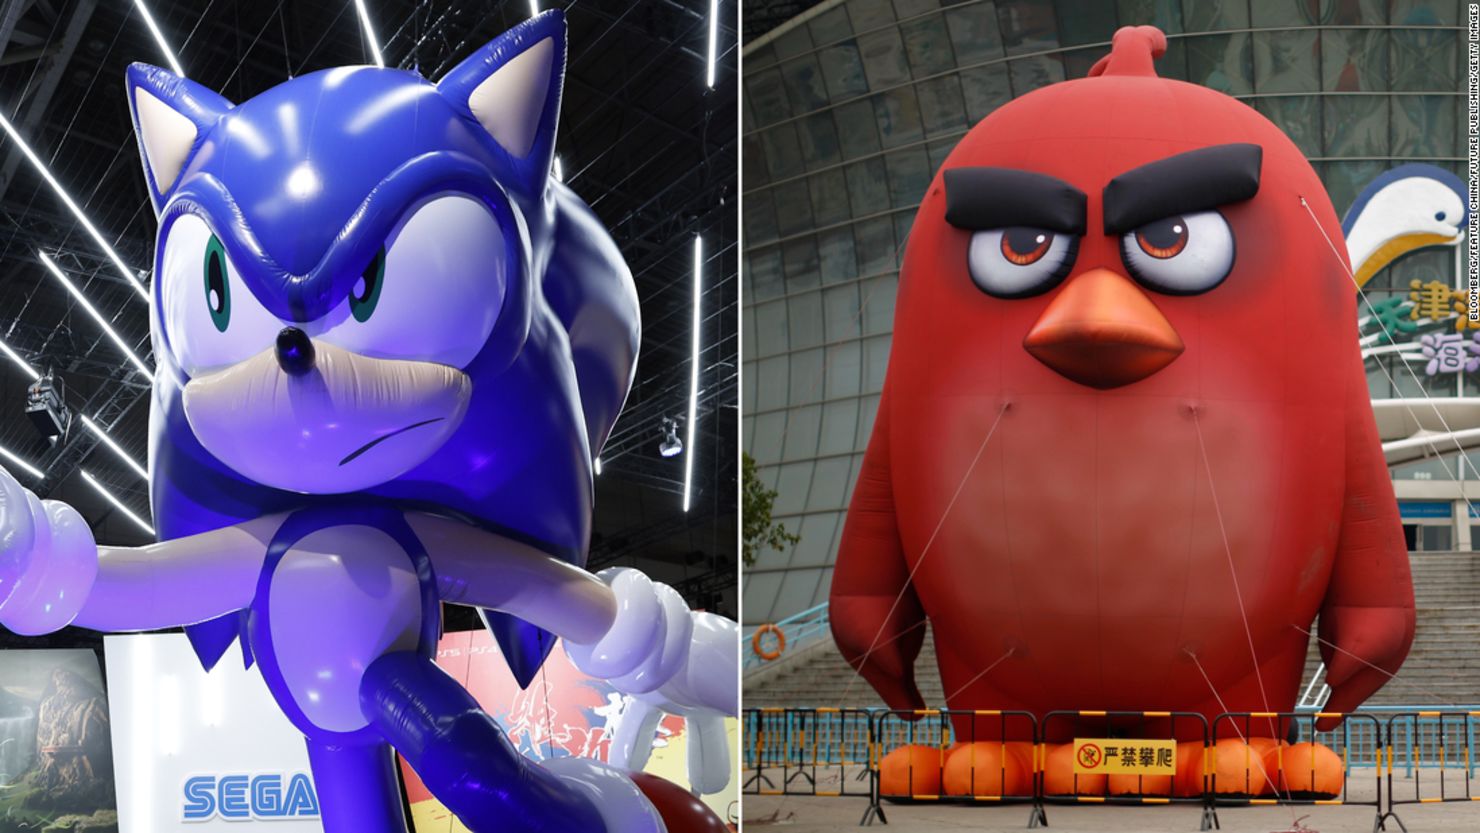 Sega wants to buy Rovio, the creator of Angry Birds, for about $775 million.